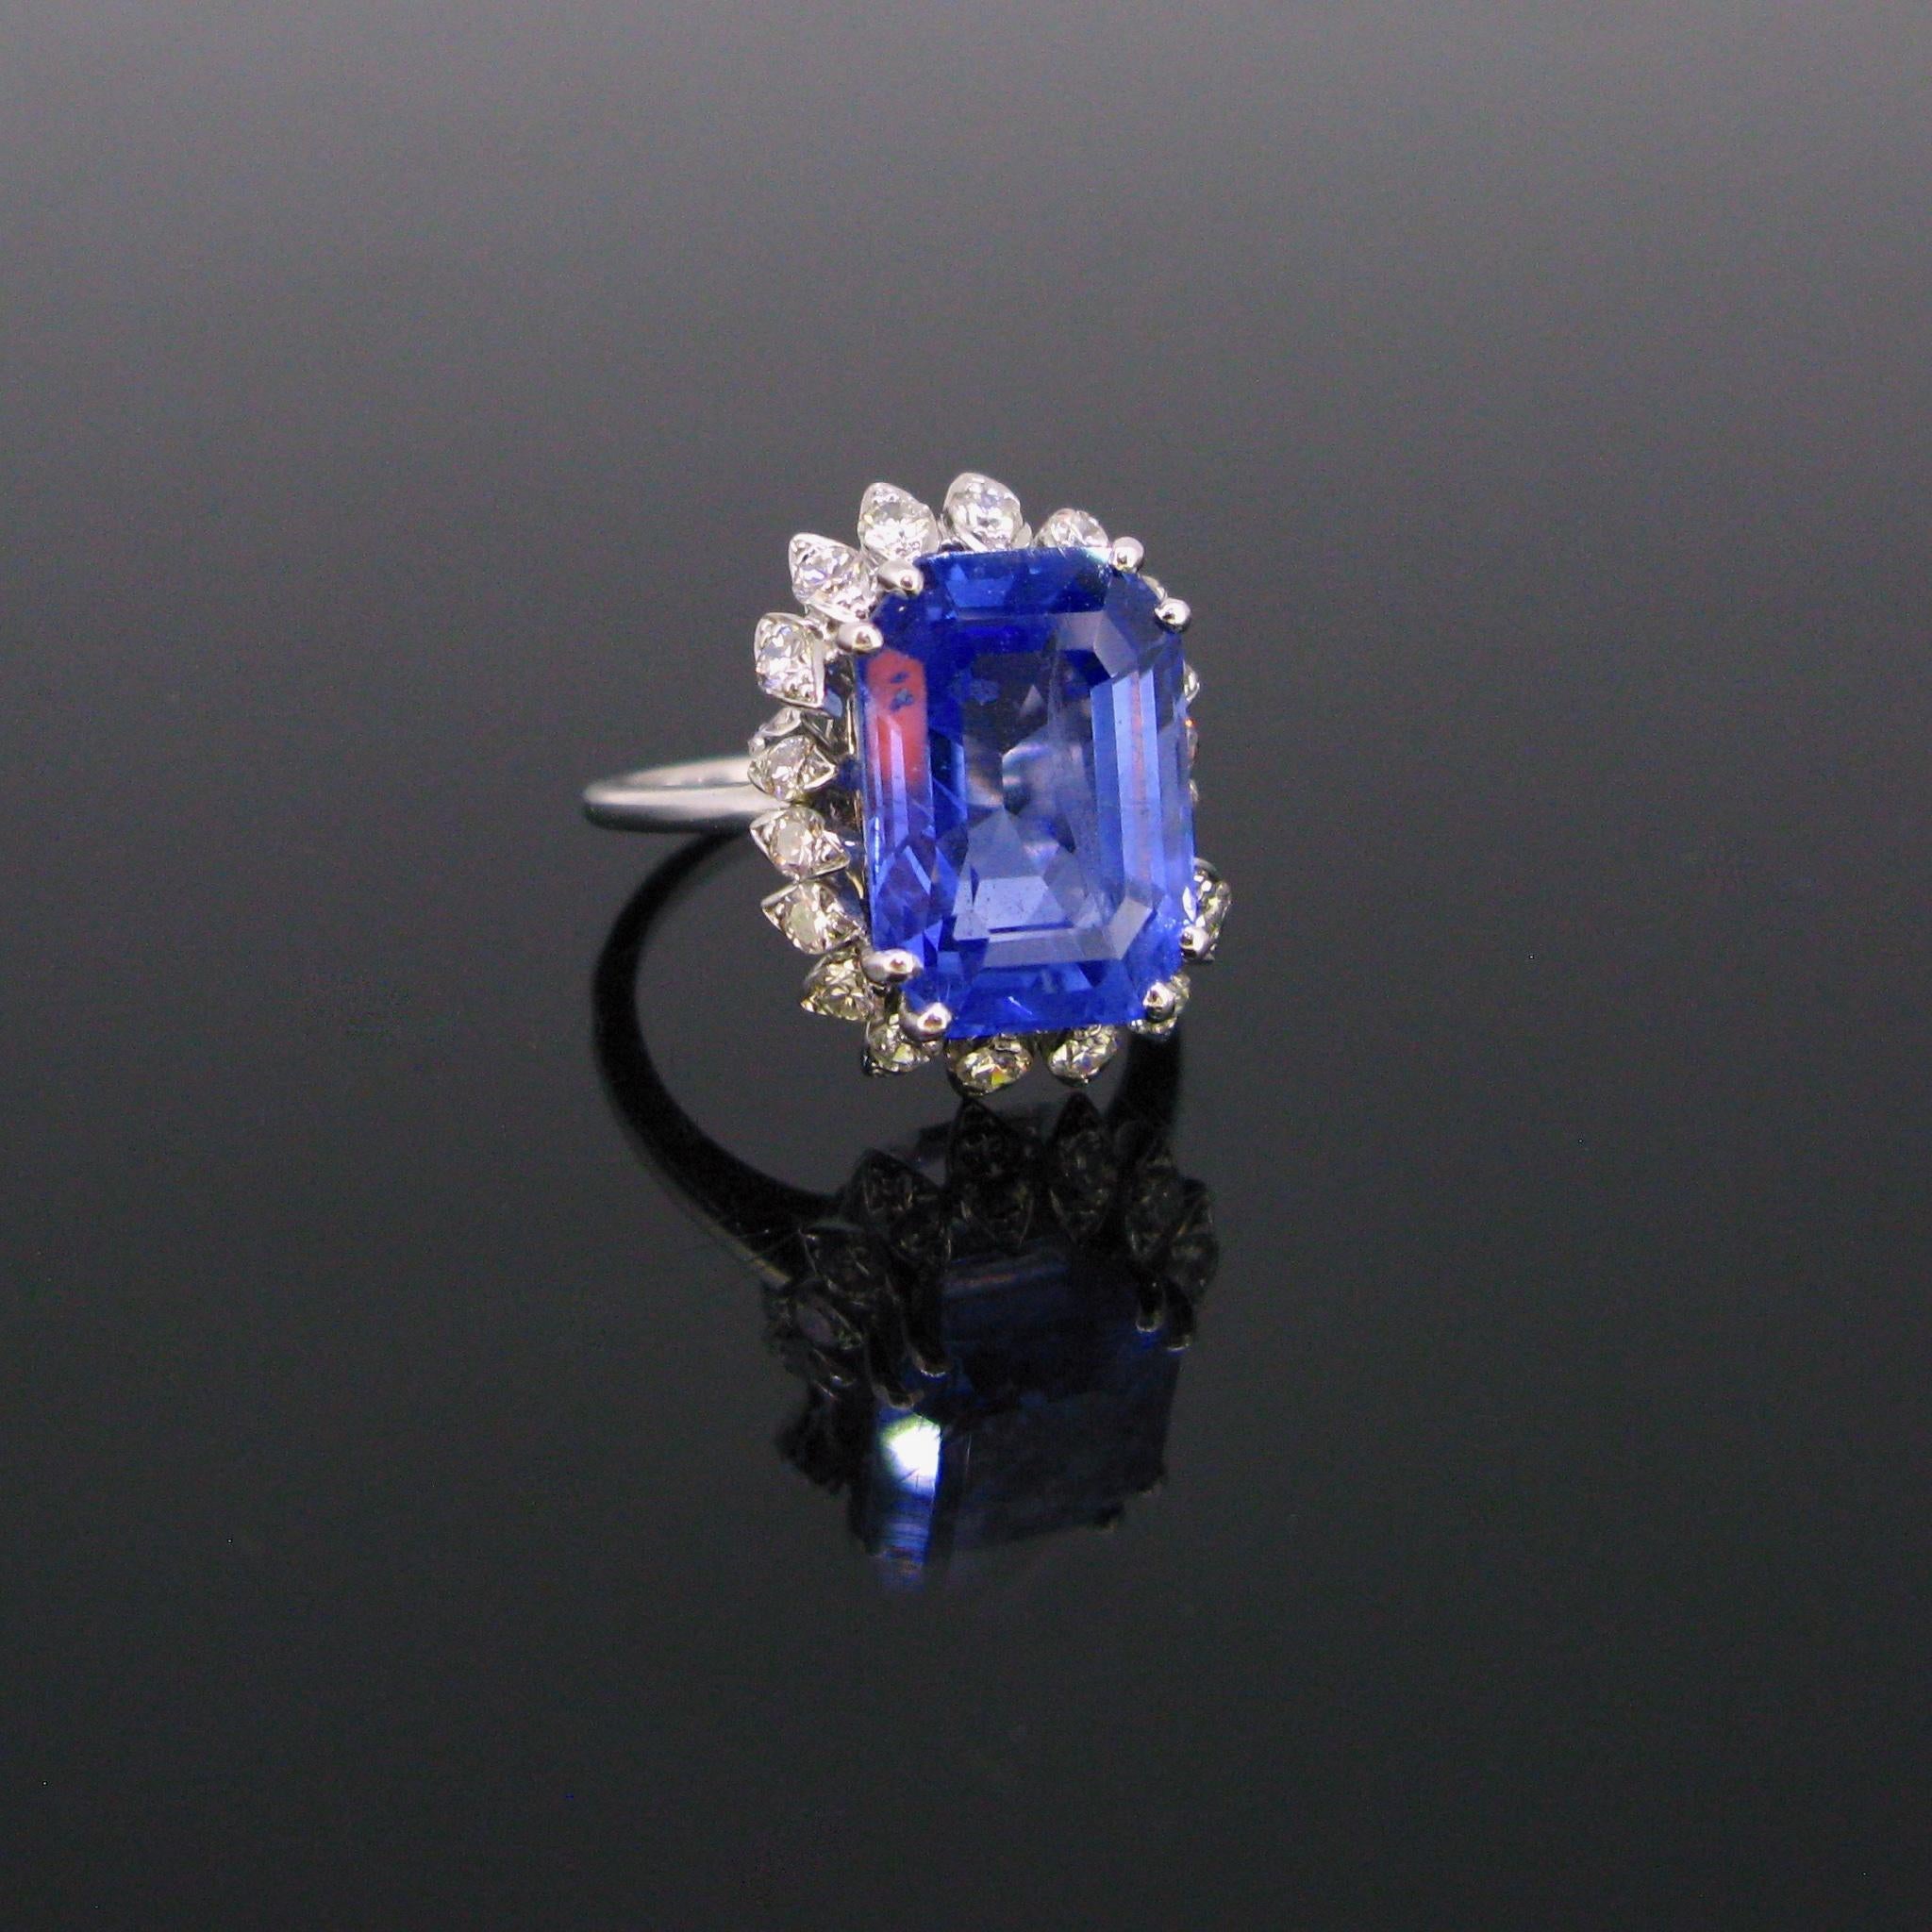 10.50 Carat Ceylon Natural Sapphire Diamonds Cluster Ring by Wald 5